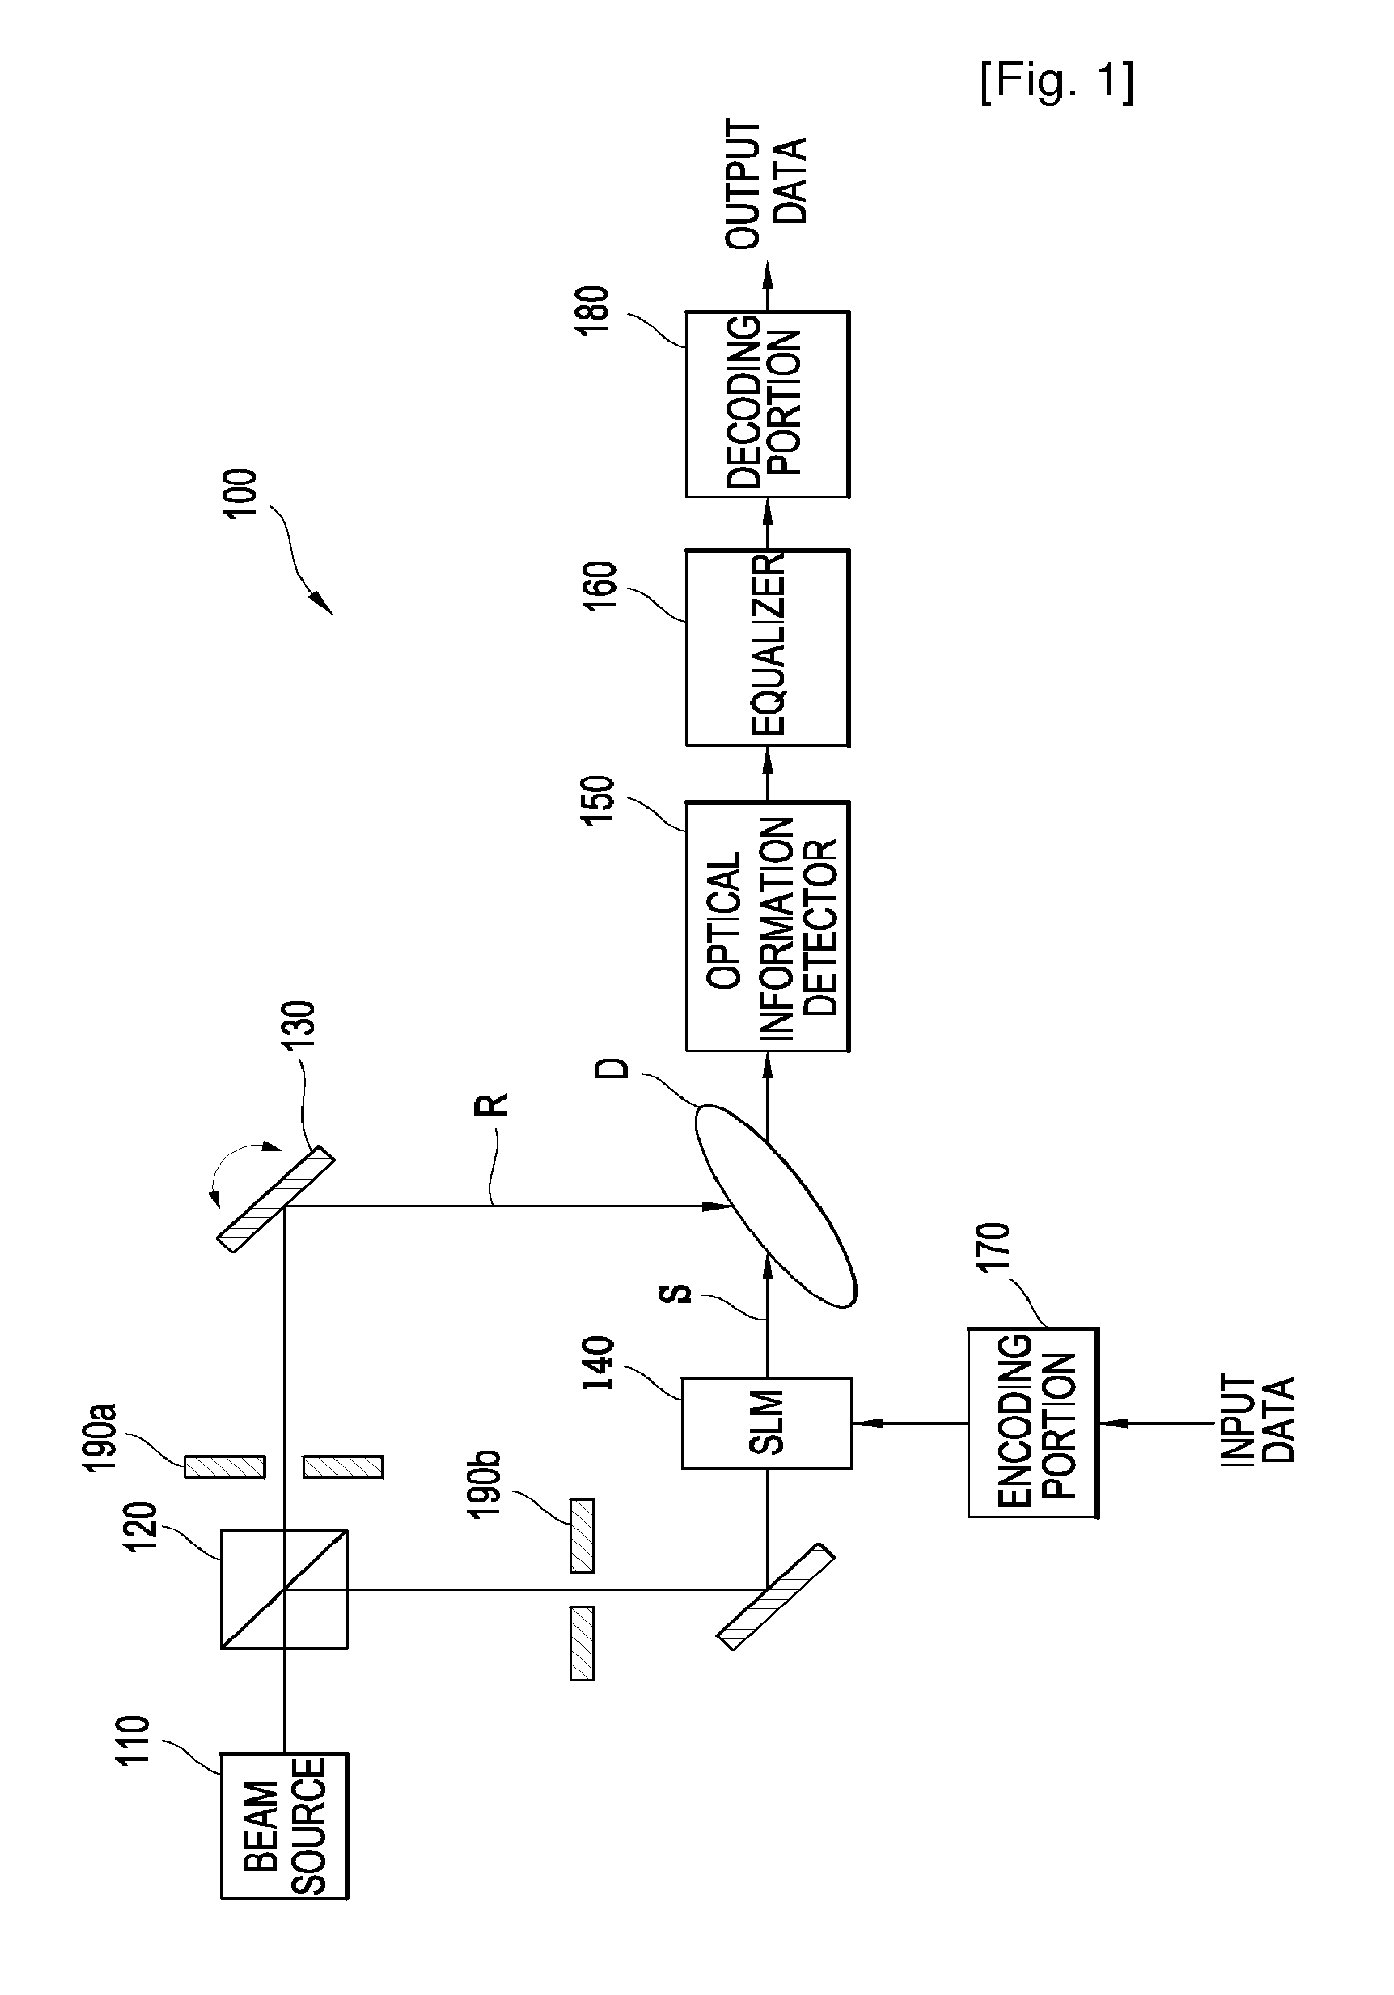 Apparatus and method for processing beam information using low density parity check code